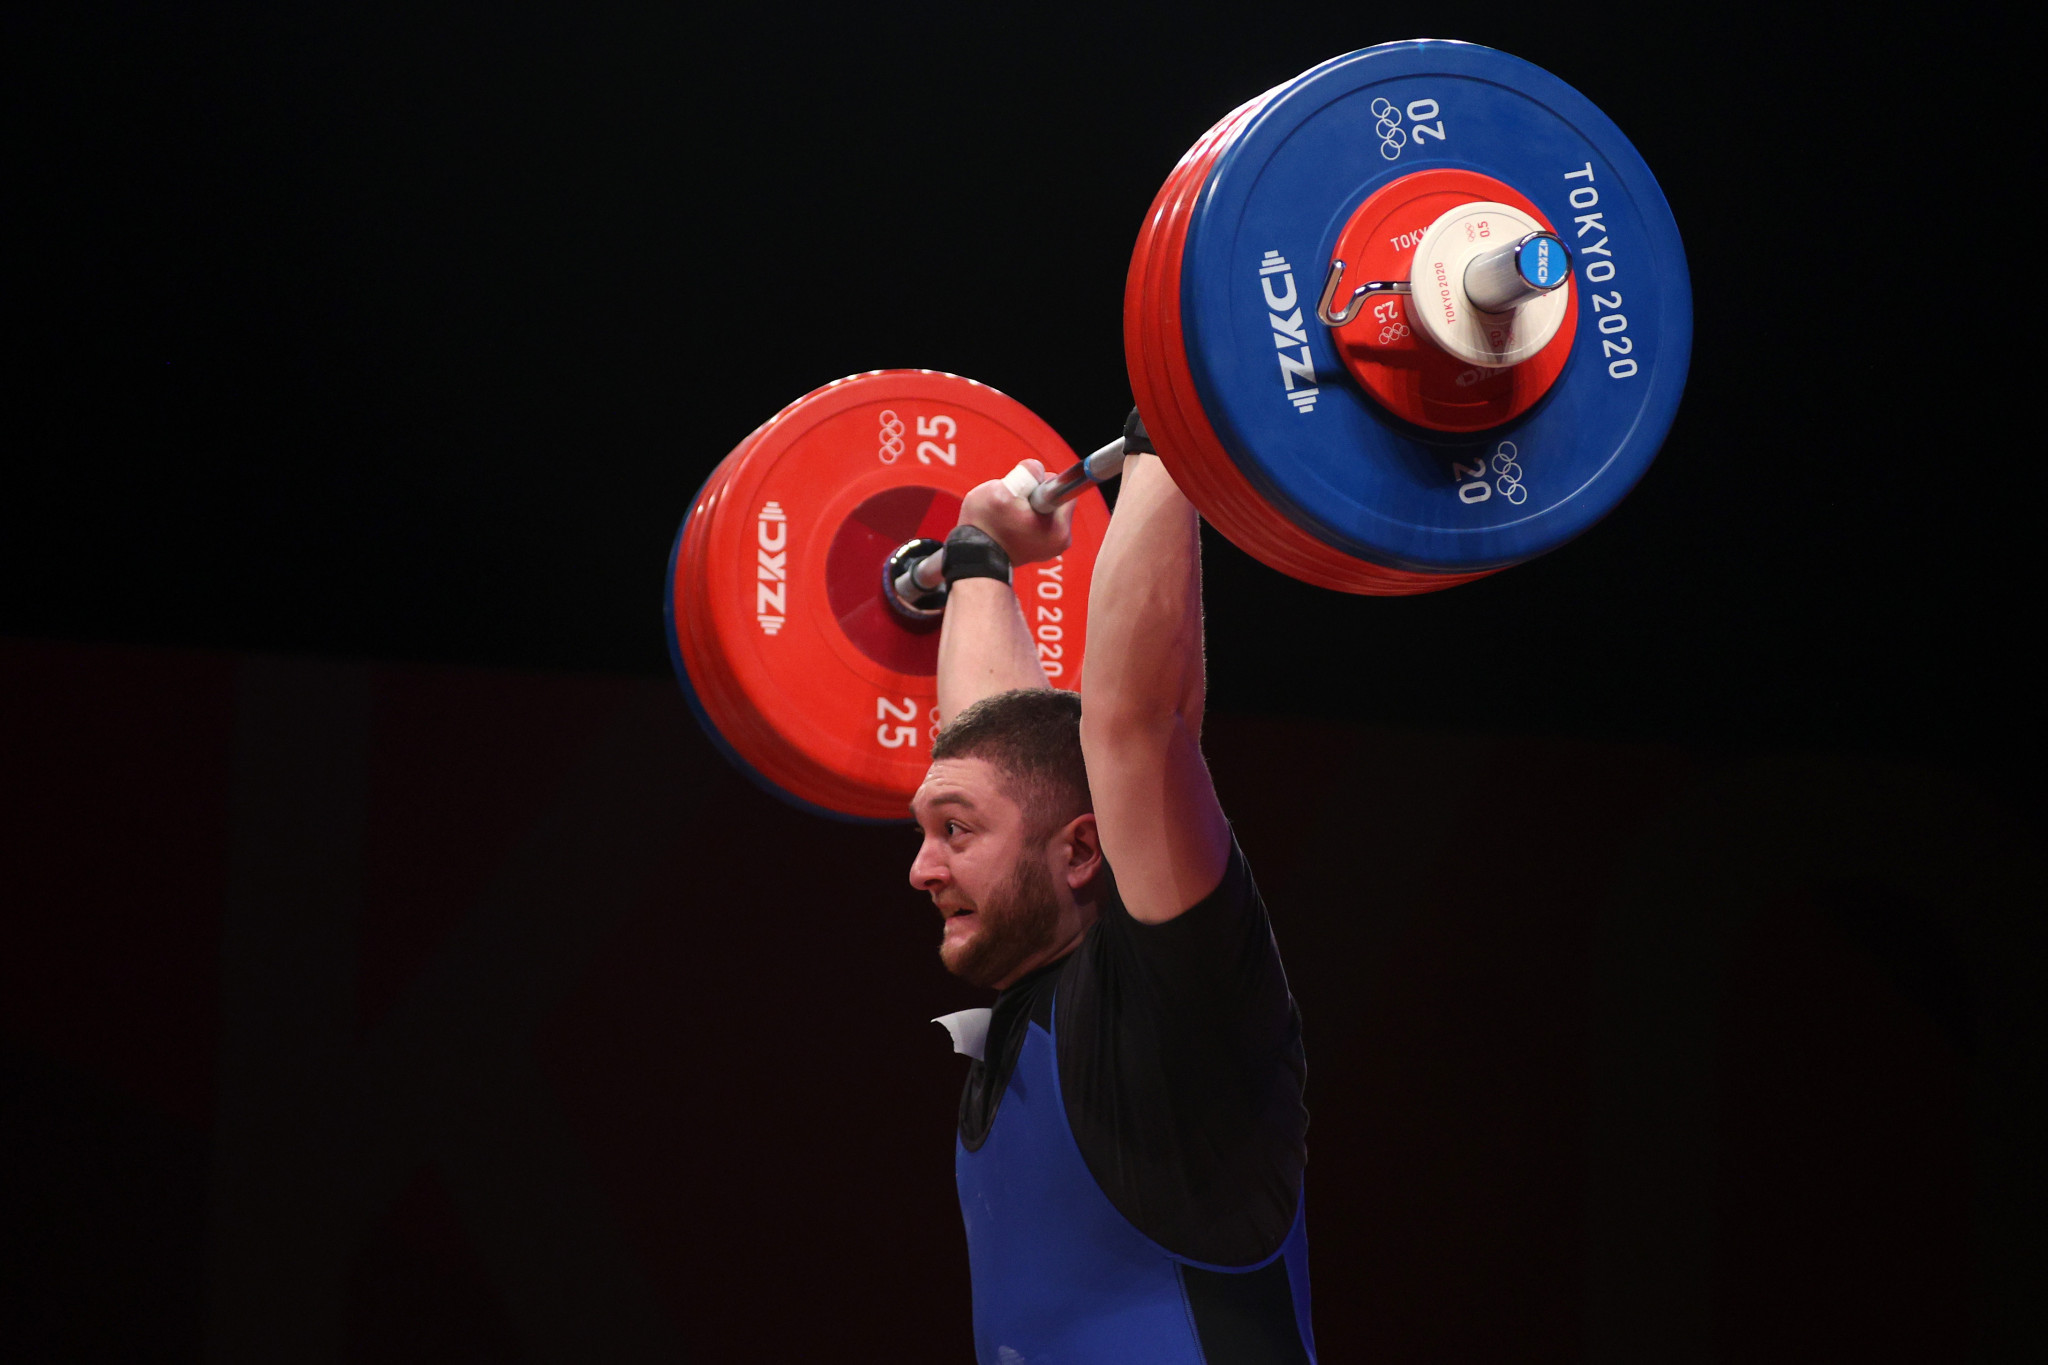 Russian and Belarusian weightlifters are now eligible to compete as neutrals in Paris 2024 qualifying events ©Getty Images